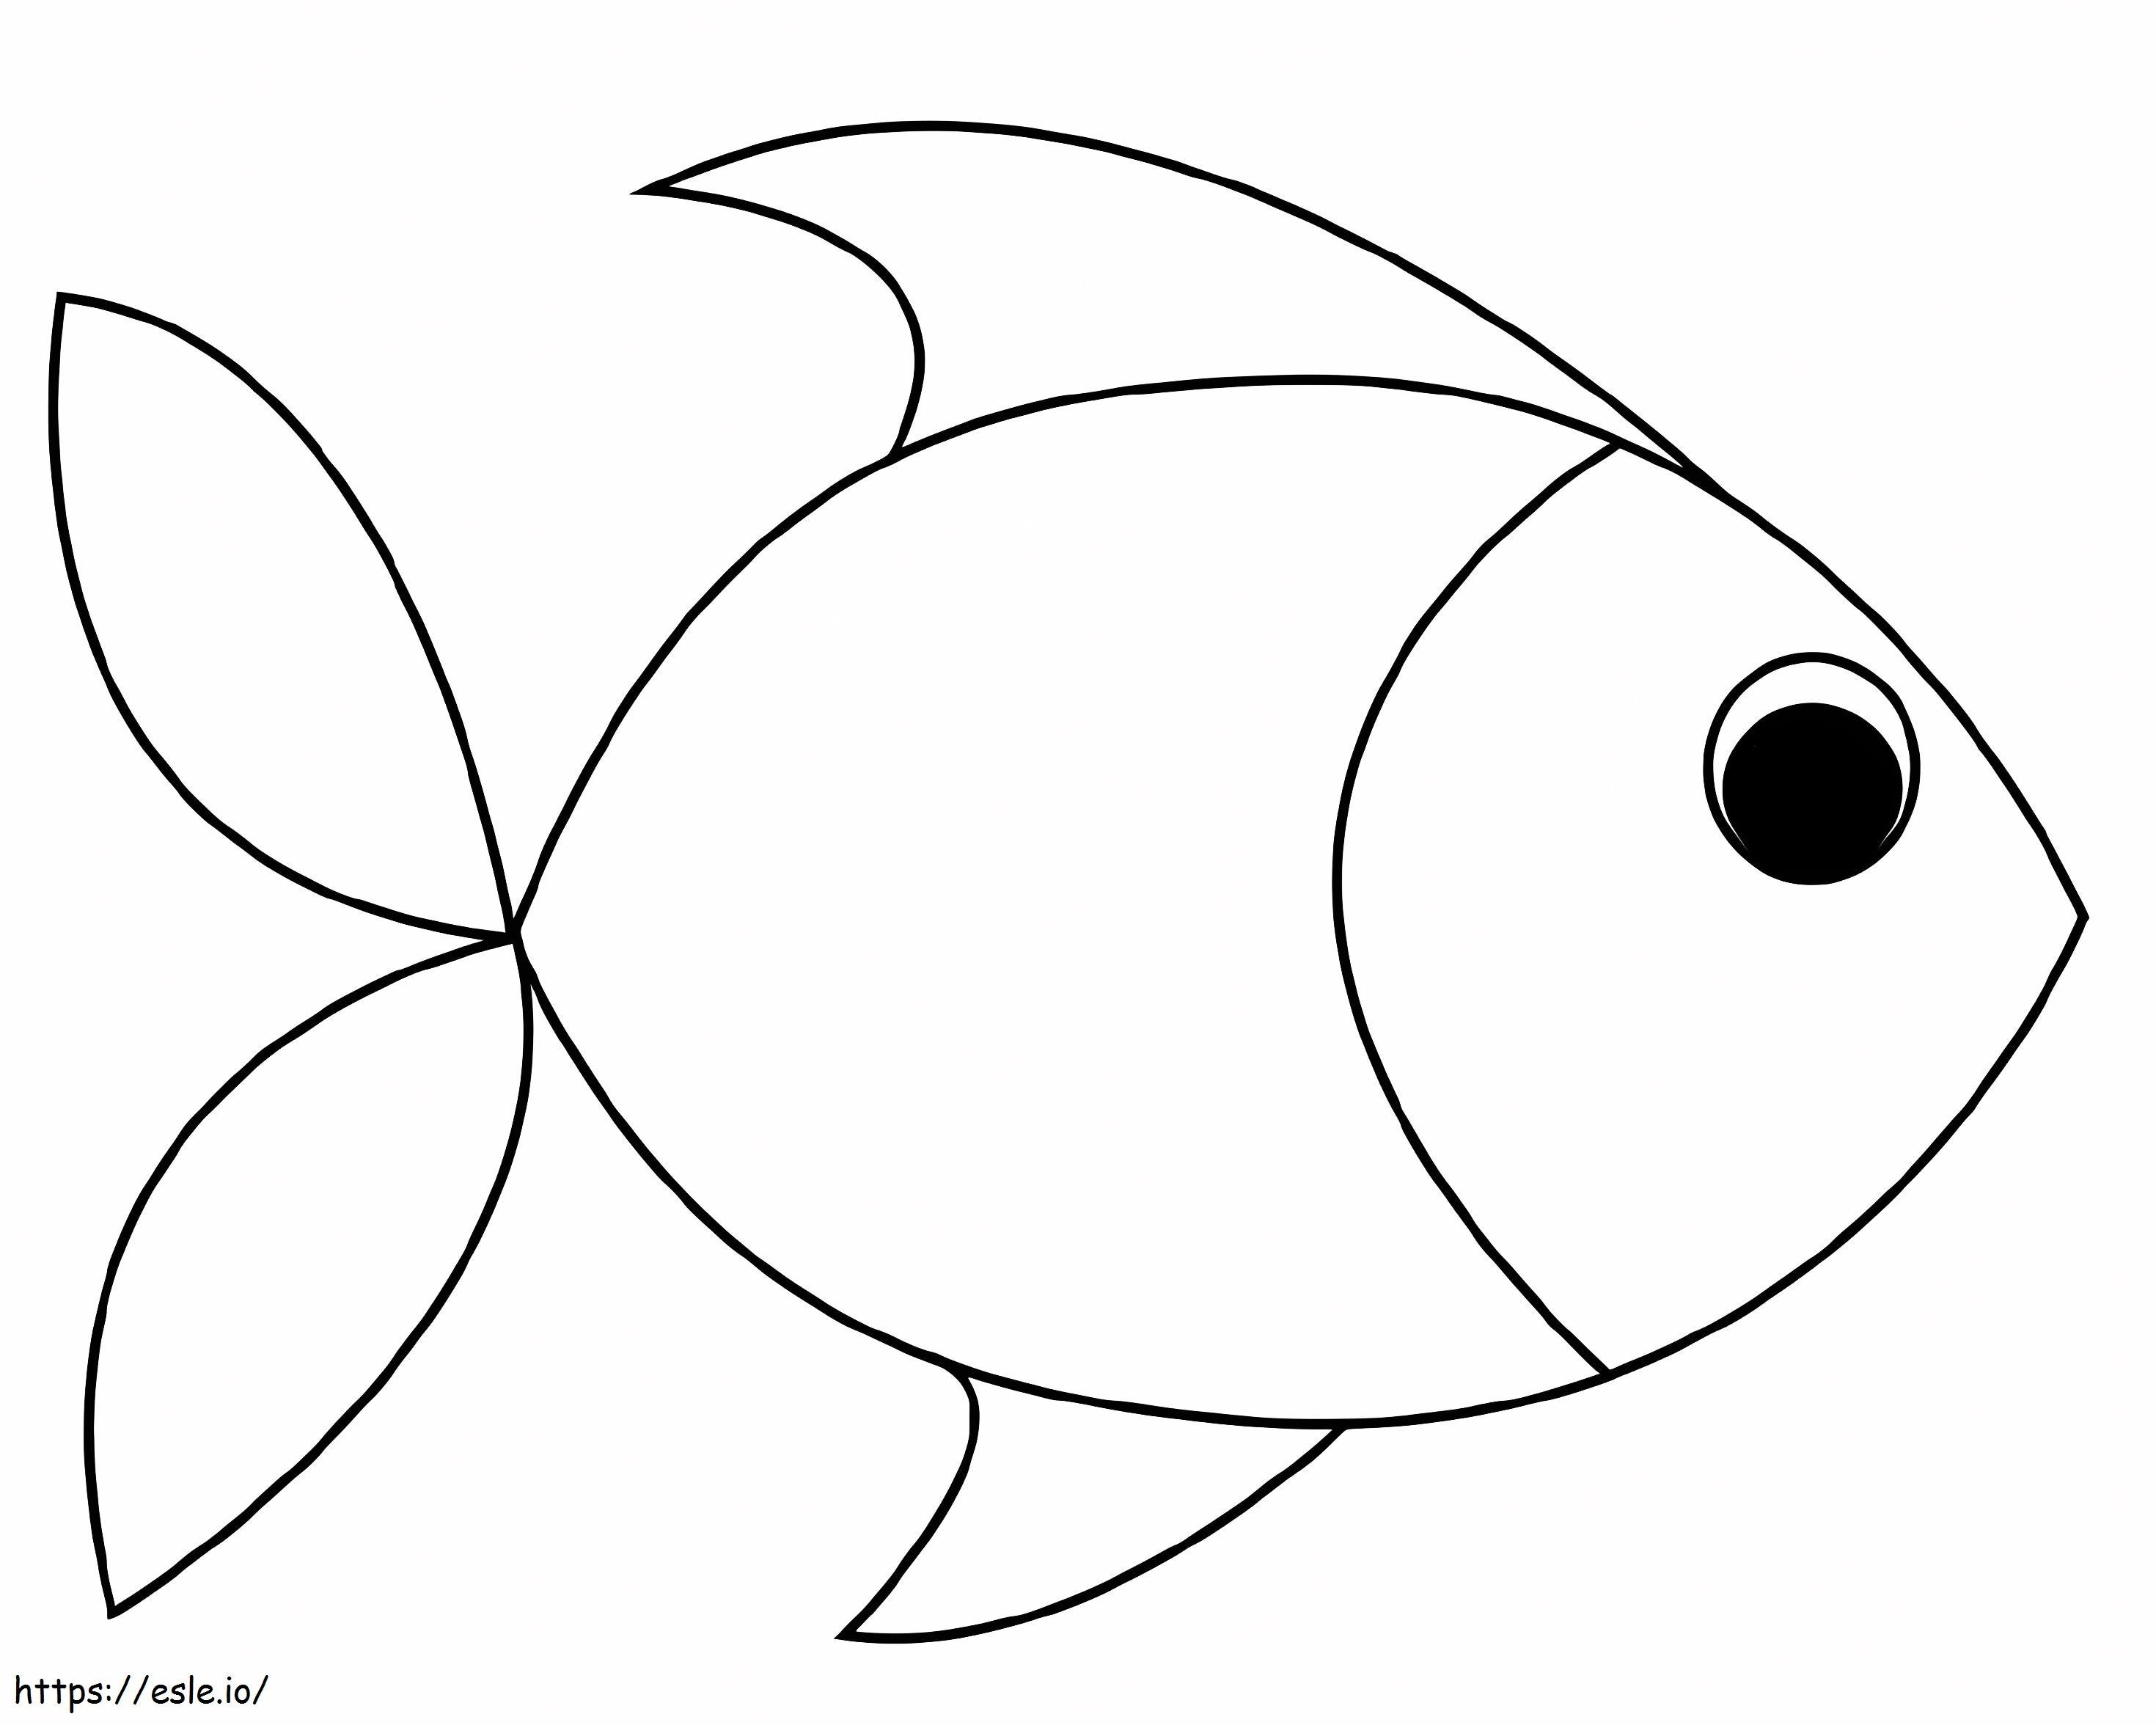 Easy Fish coloring page